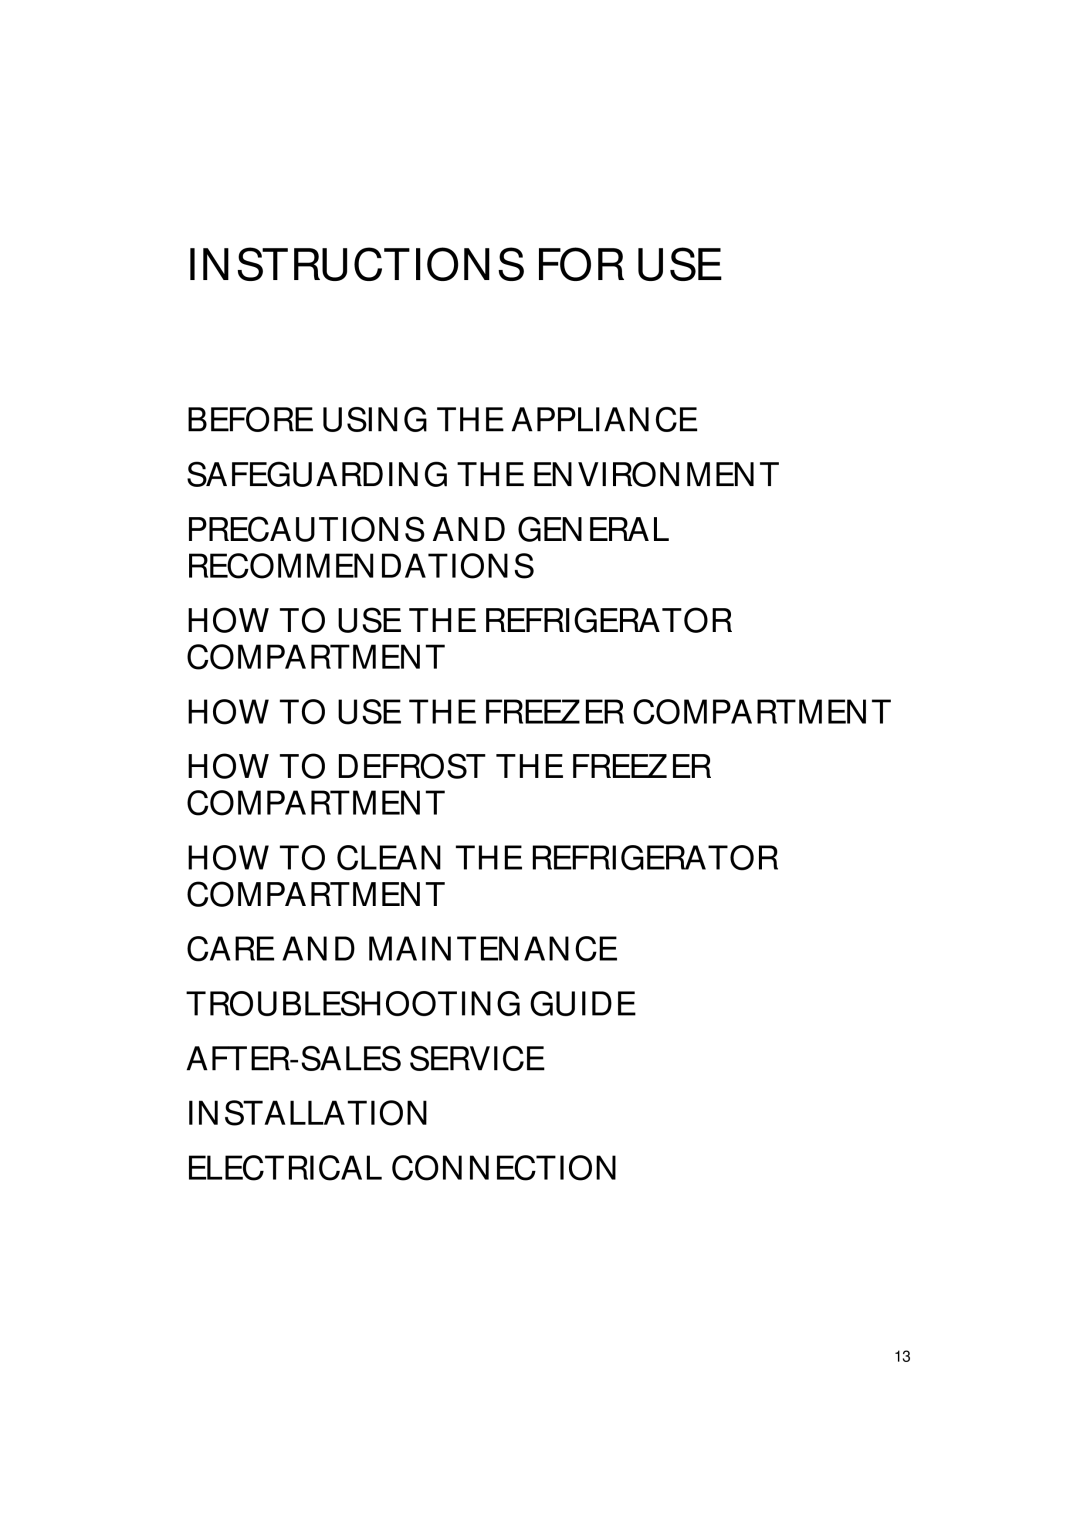 Smeg CR324A manual Precautions And General Recommendations, How To Use The Refrigerator Compartment, Electrical Connection 